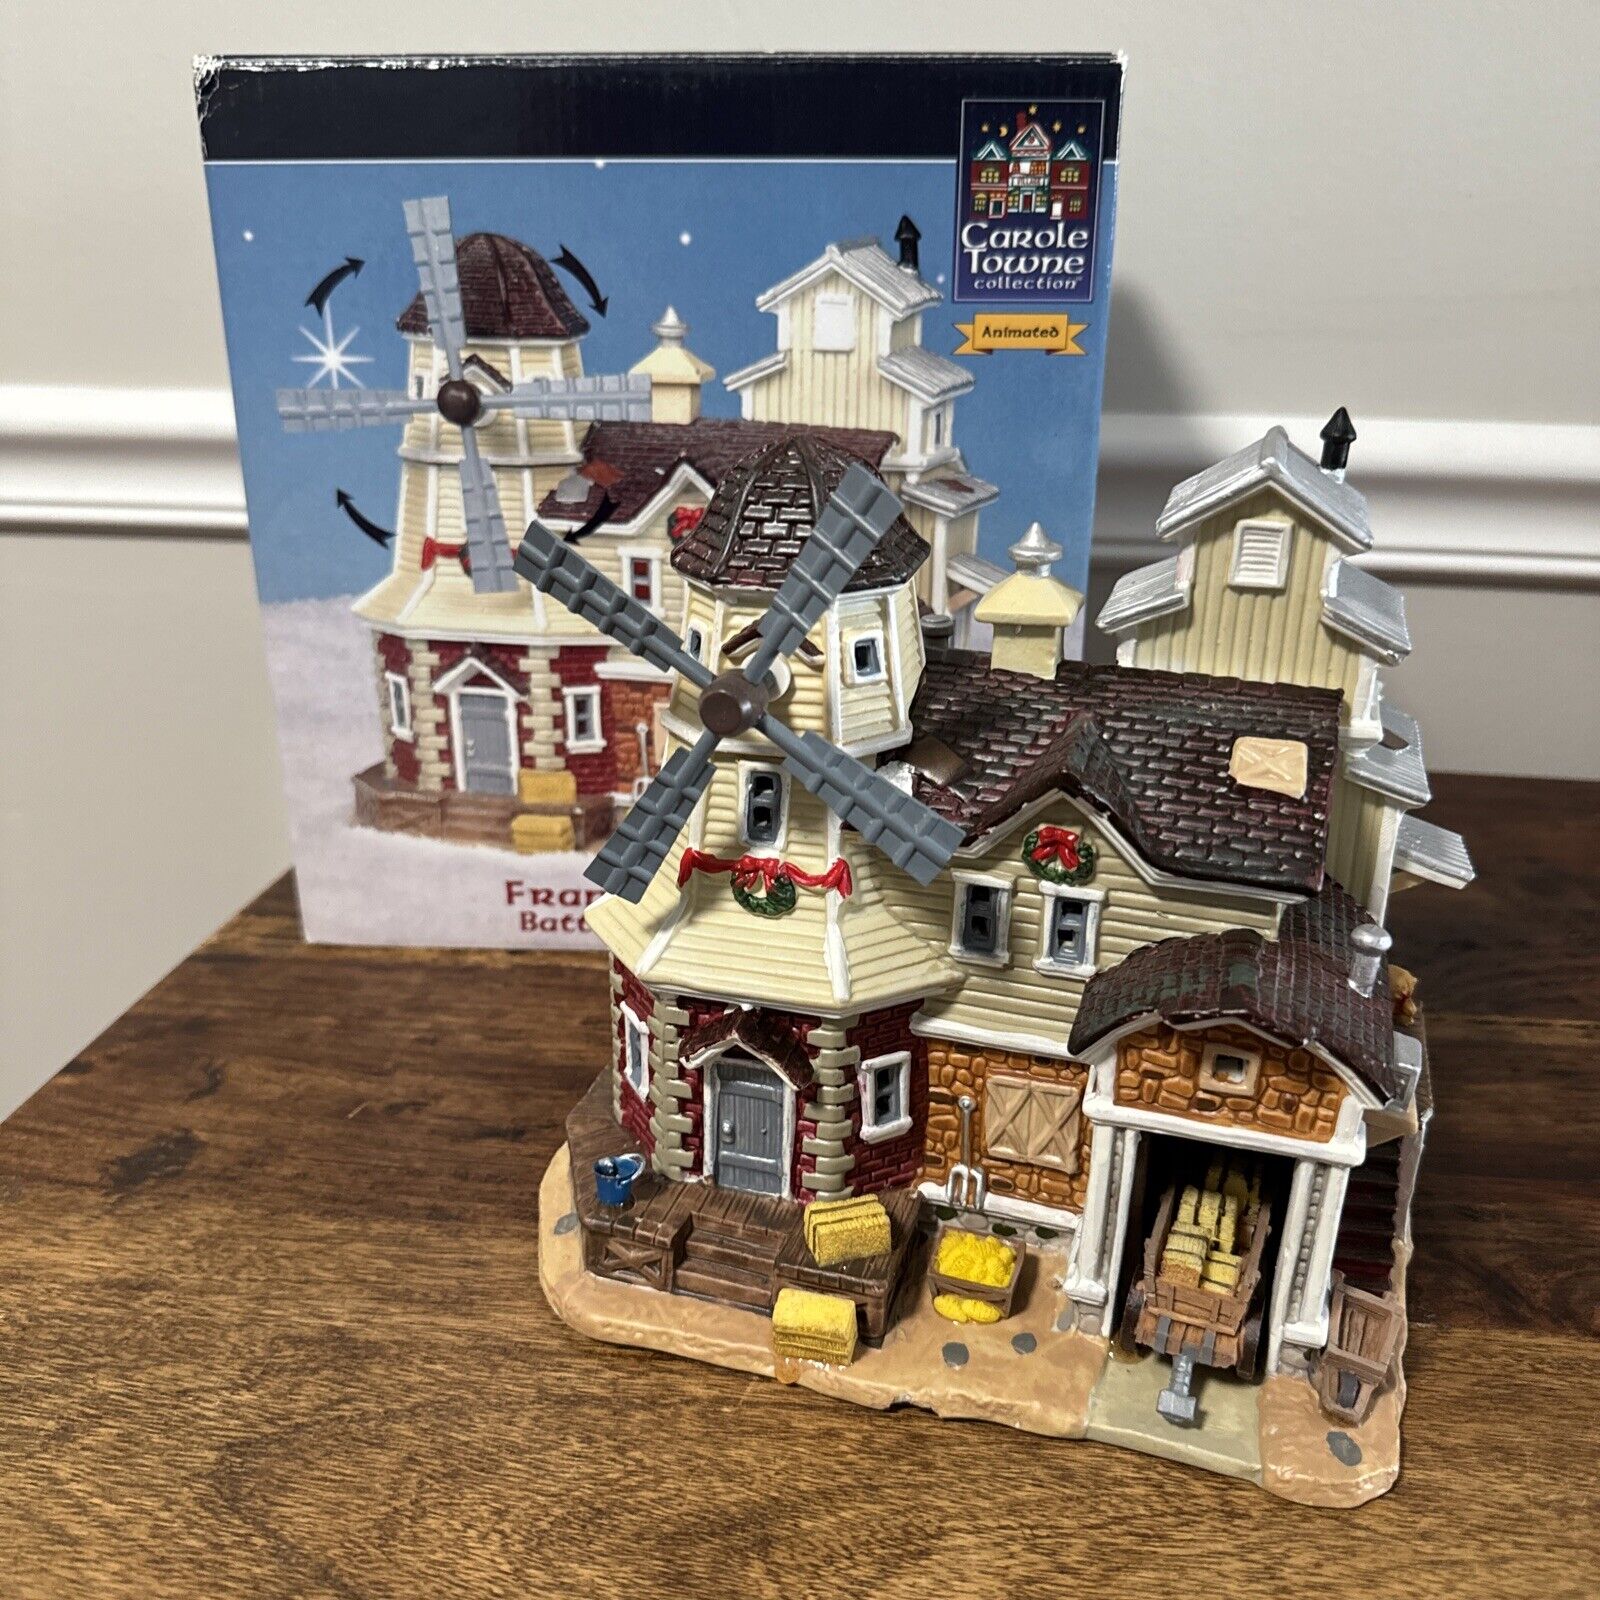 Lemax Carole Towne Collection Christmas Village 2006 Franklin’s Farm UNTESTED